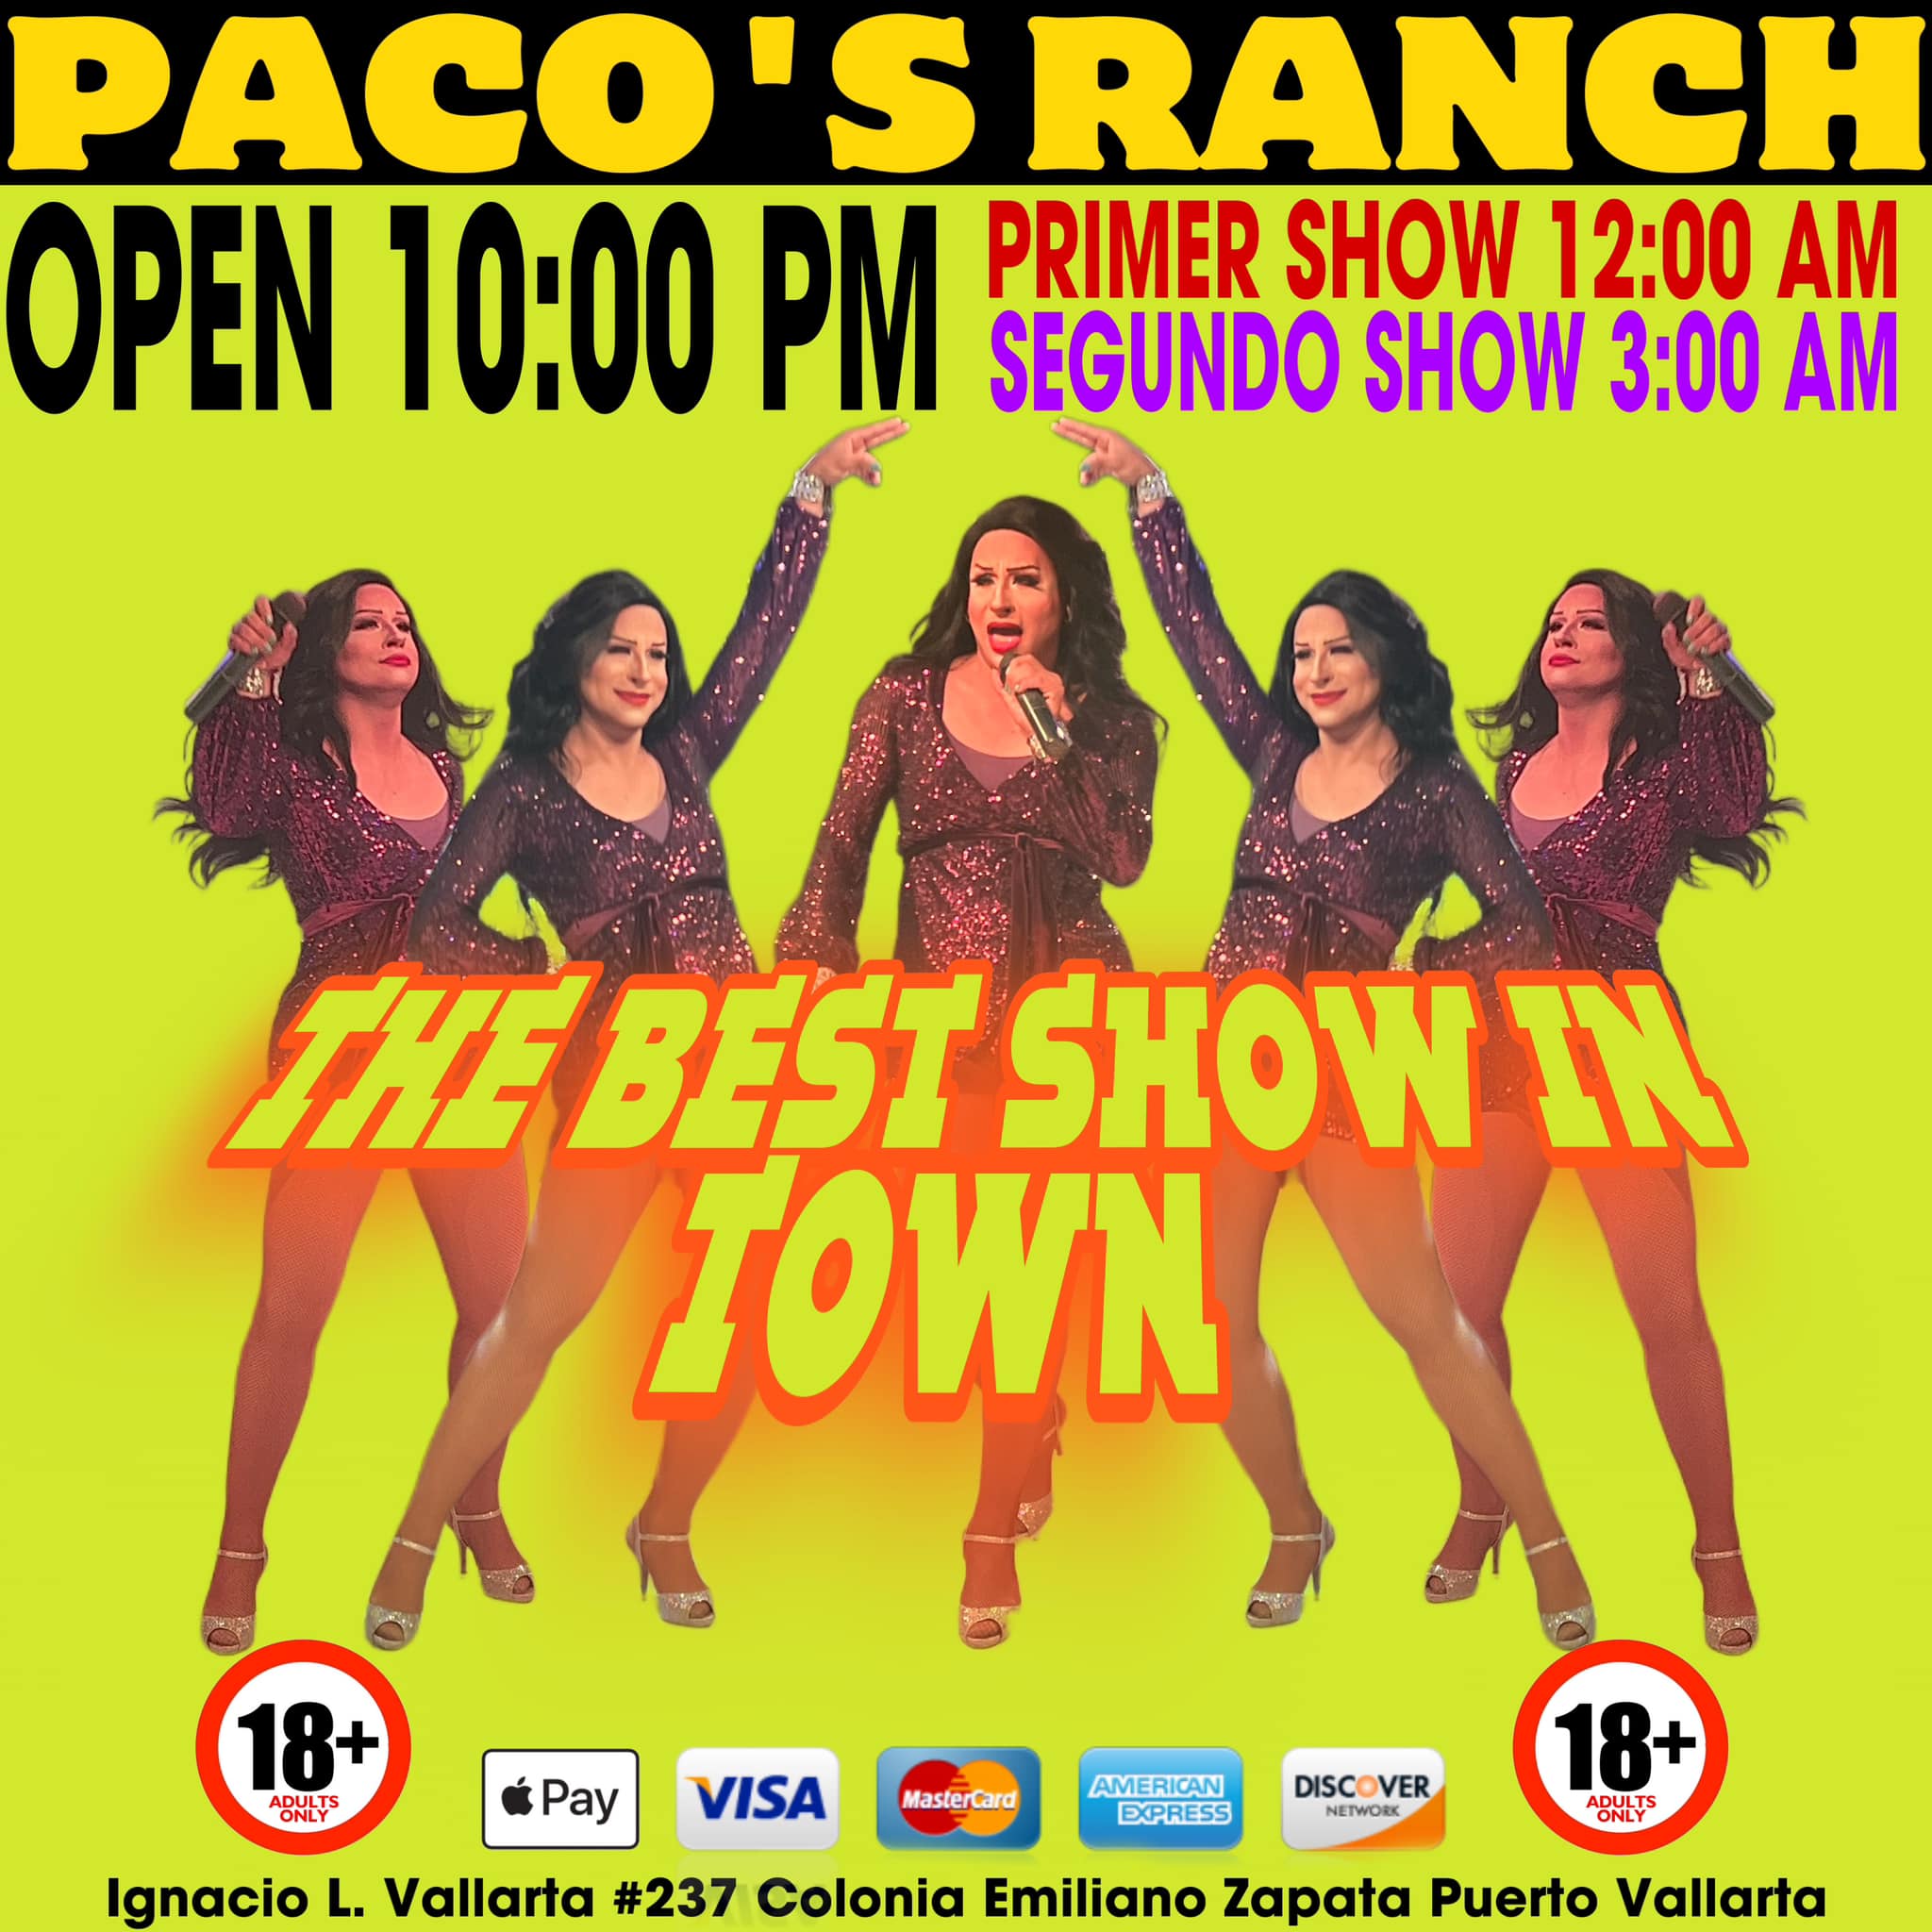 The Girls From Paco's Ranch